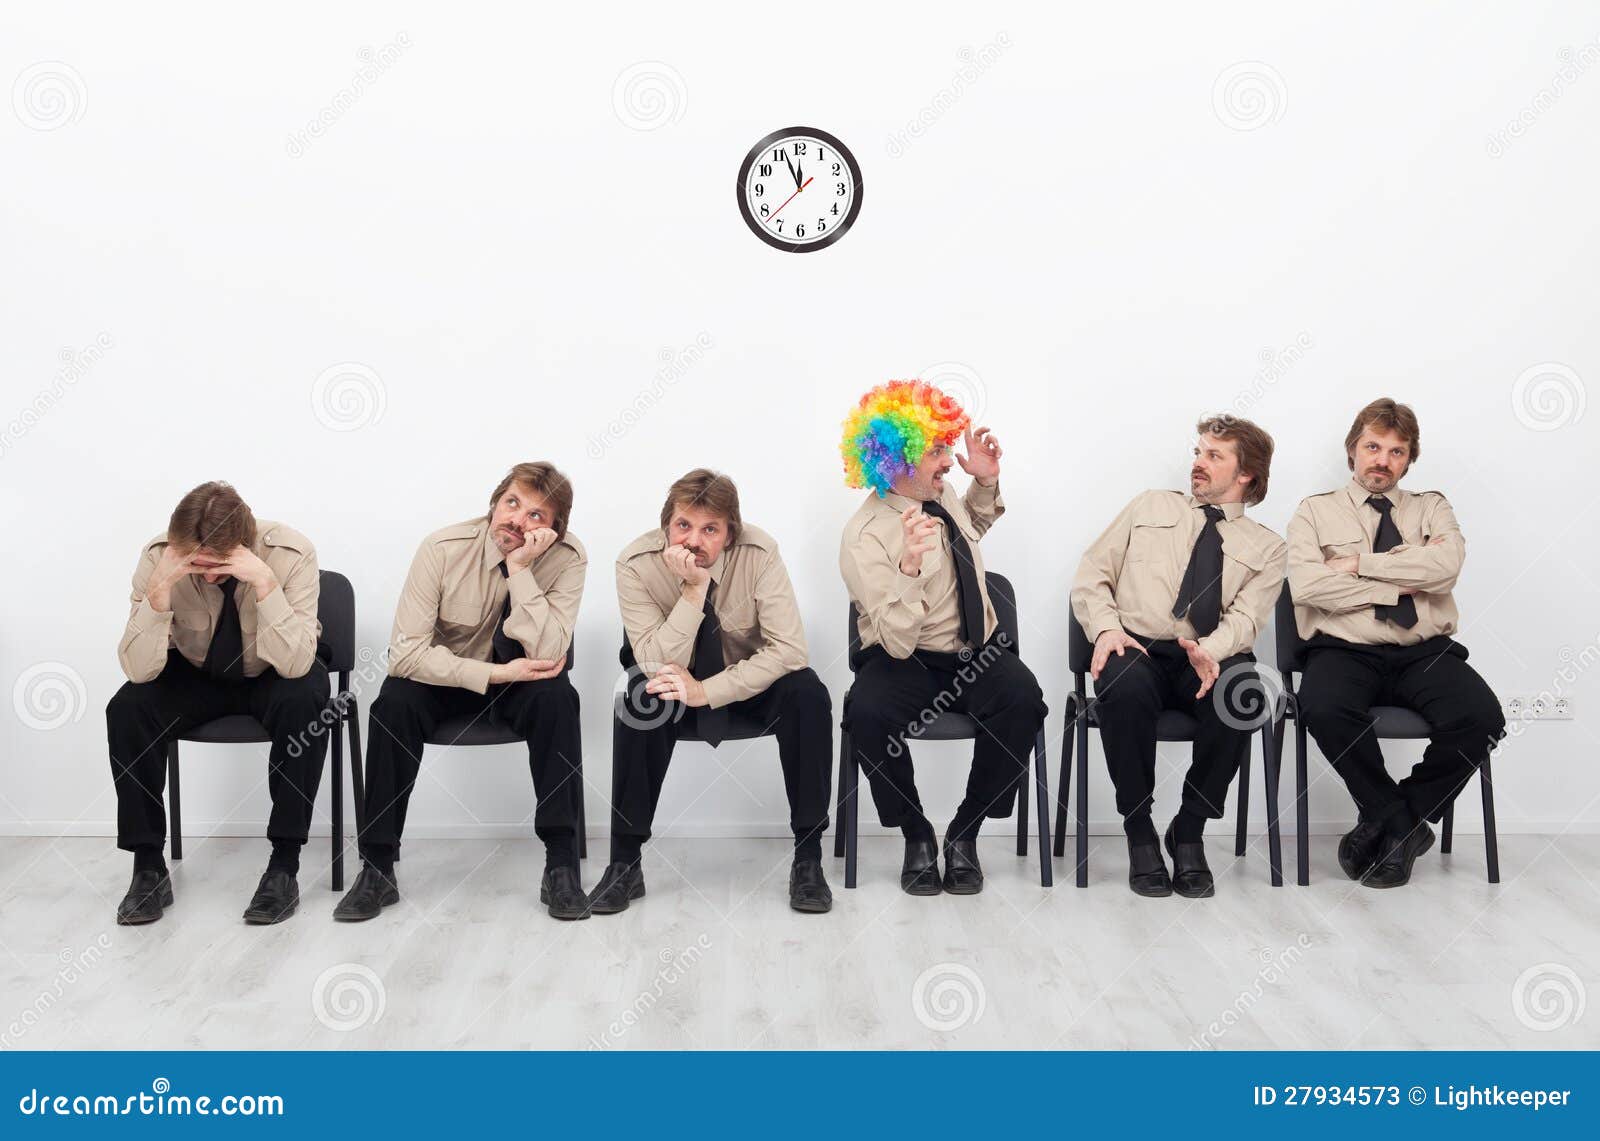 stressed people waiting for a job interview